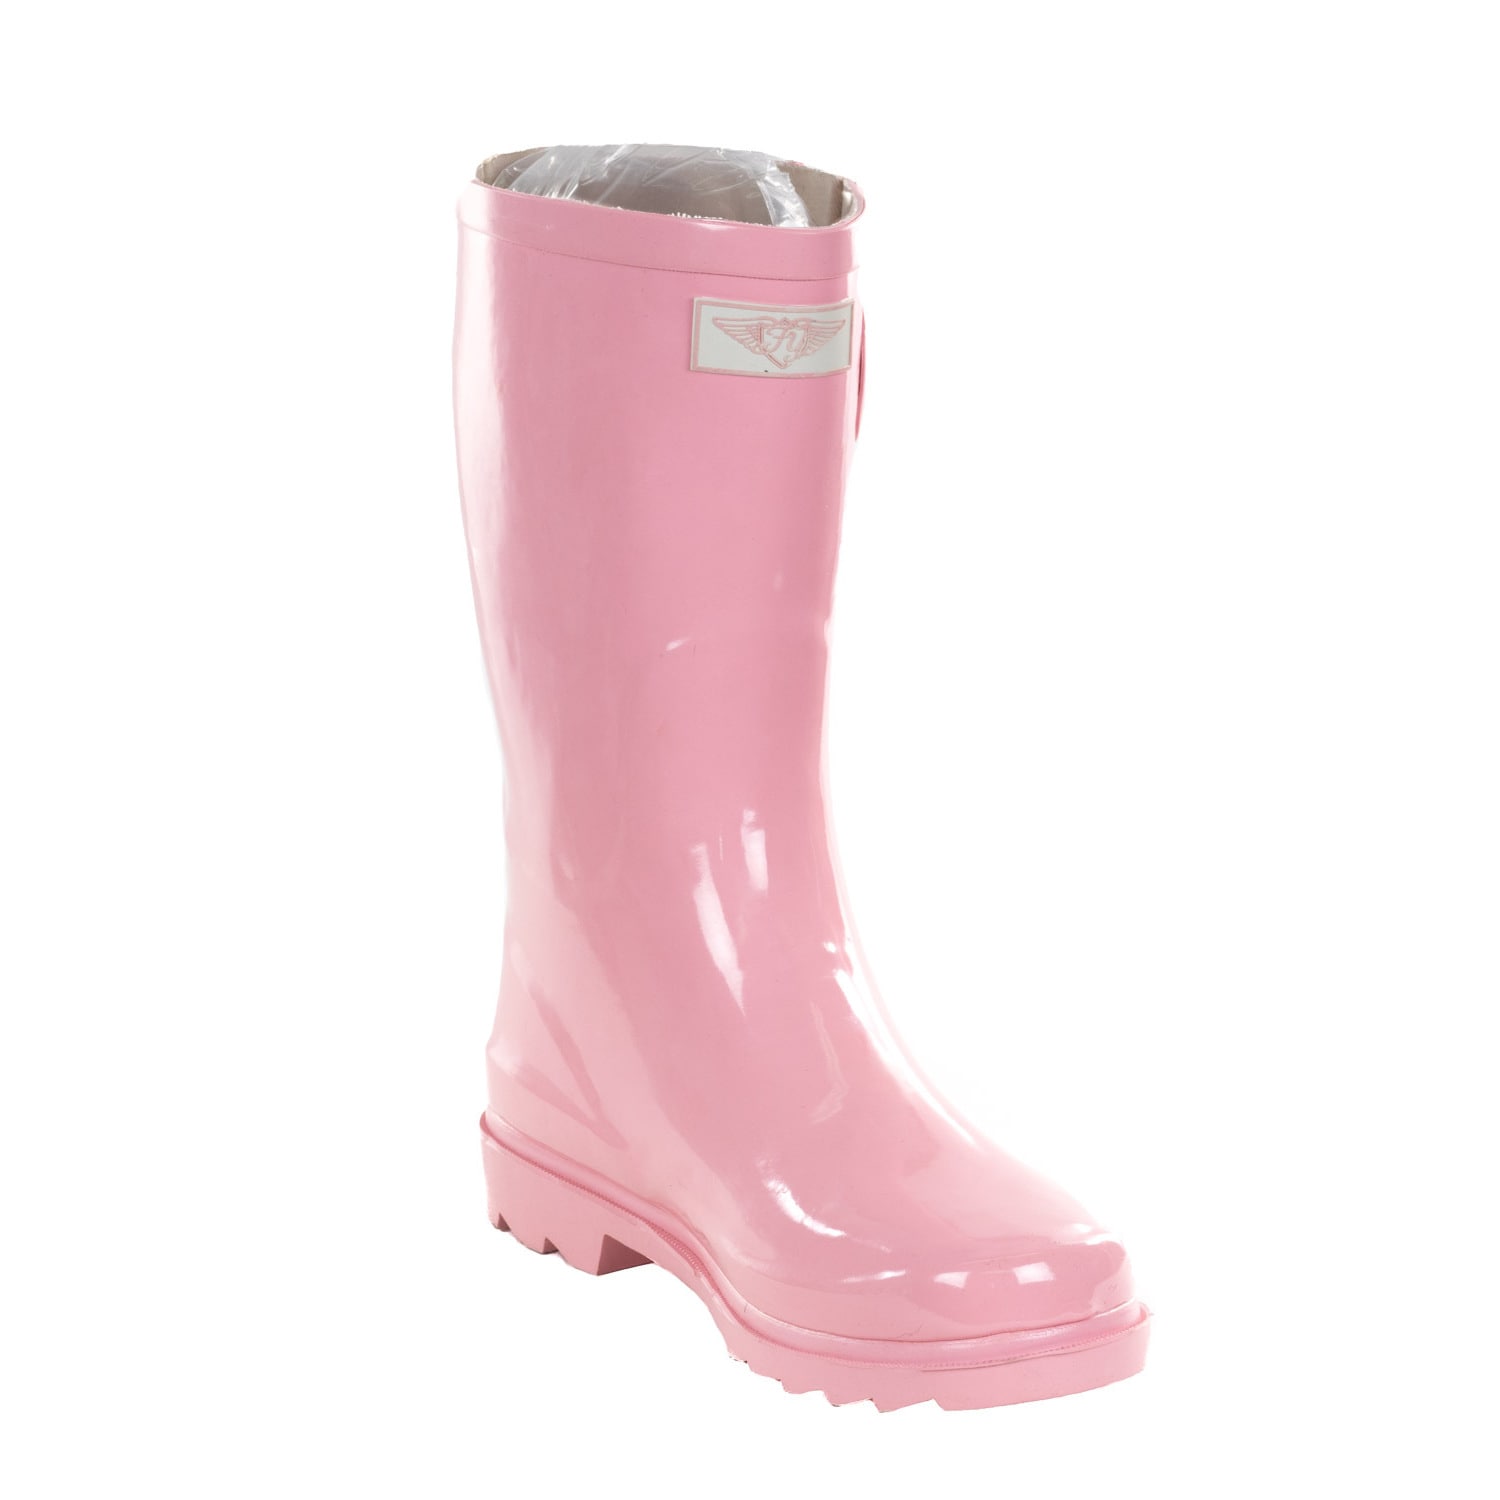 hot pink rubber boots